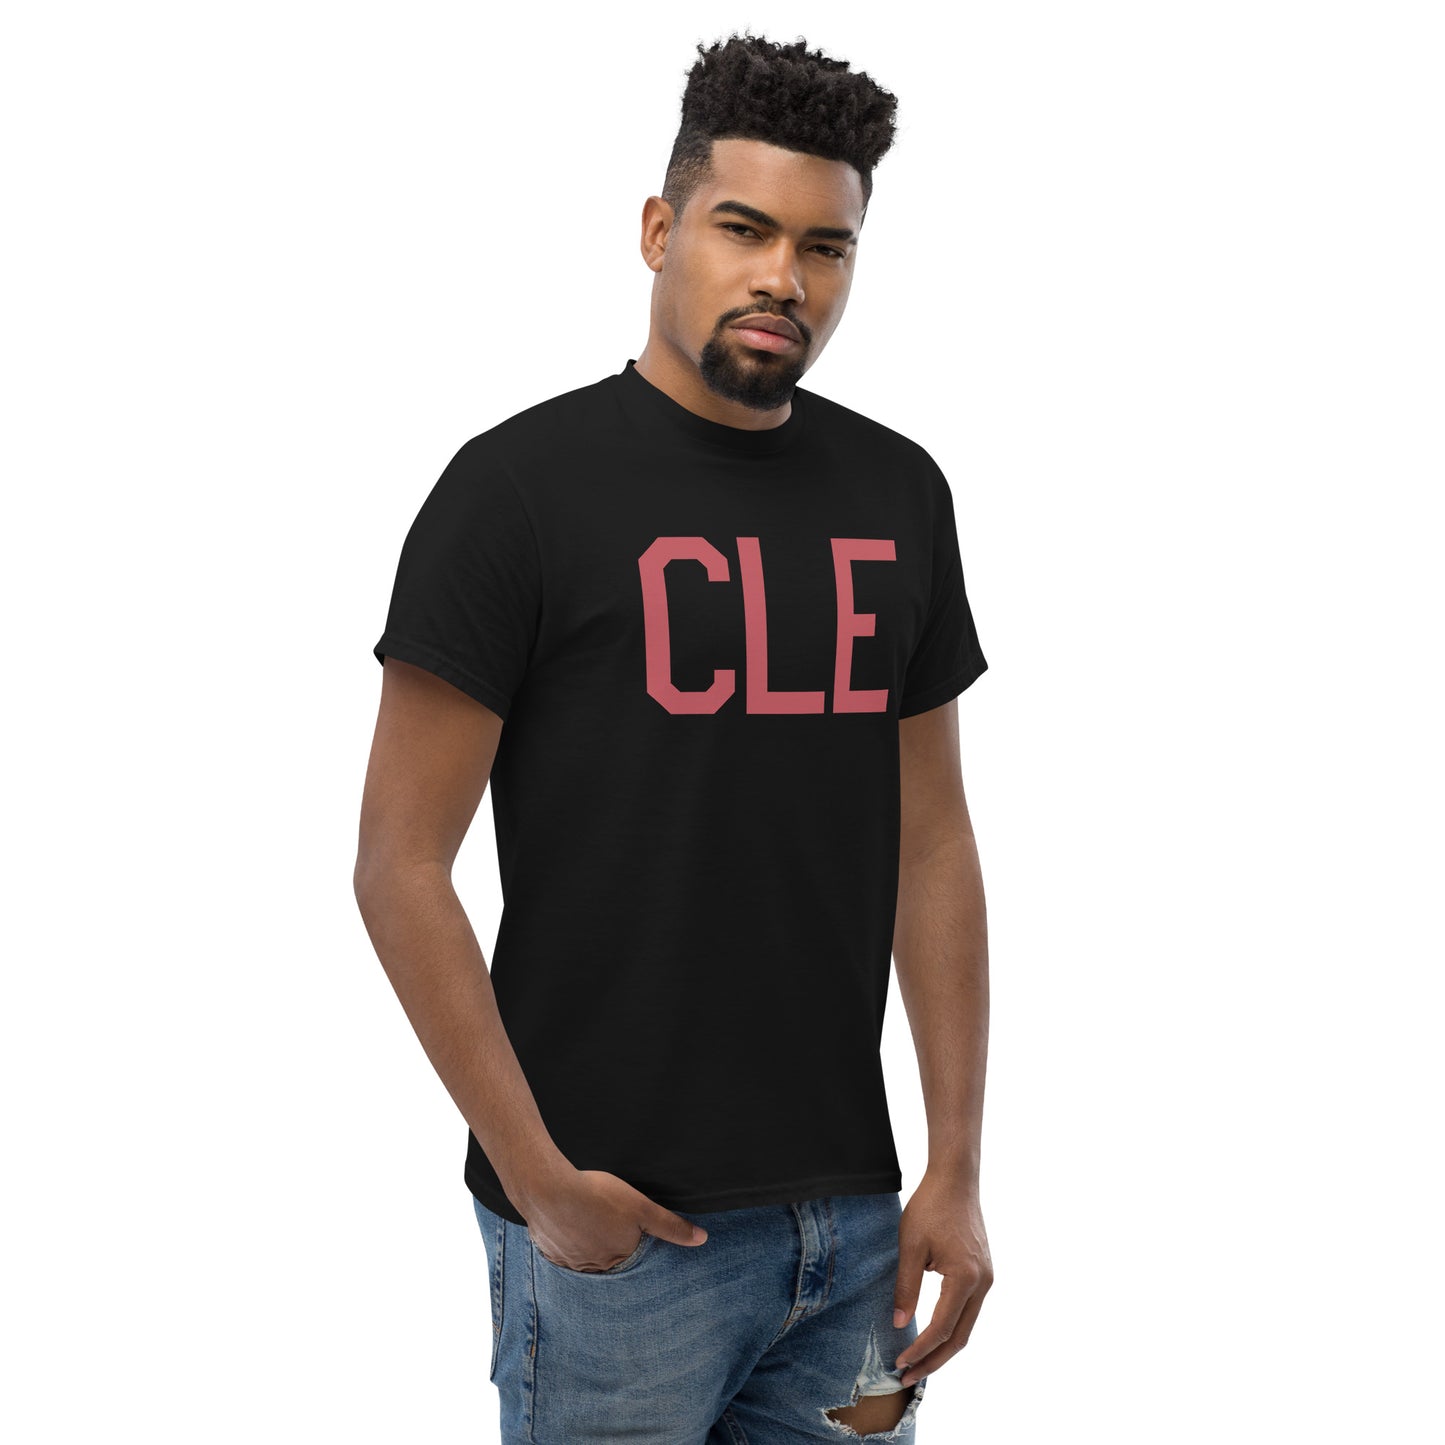 Aviation Enthusiast Men's Tee - Deep Pink Graphic • CLE Cleveland • YHM Designs - Image 08